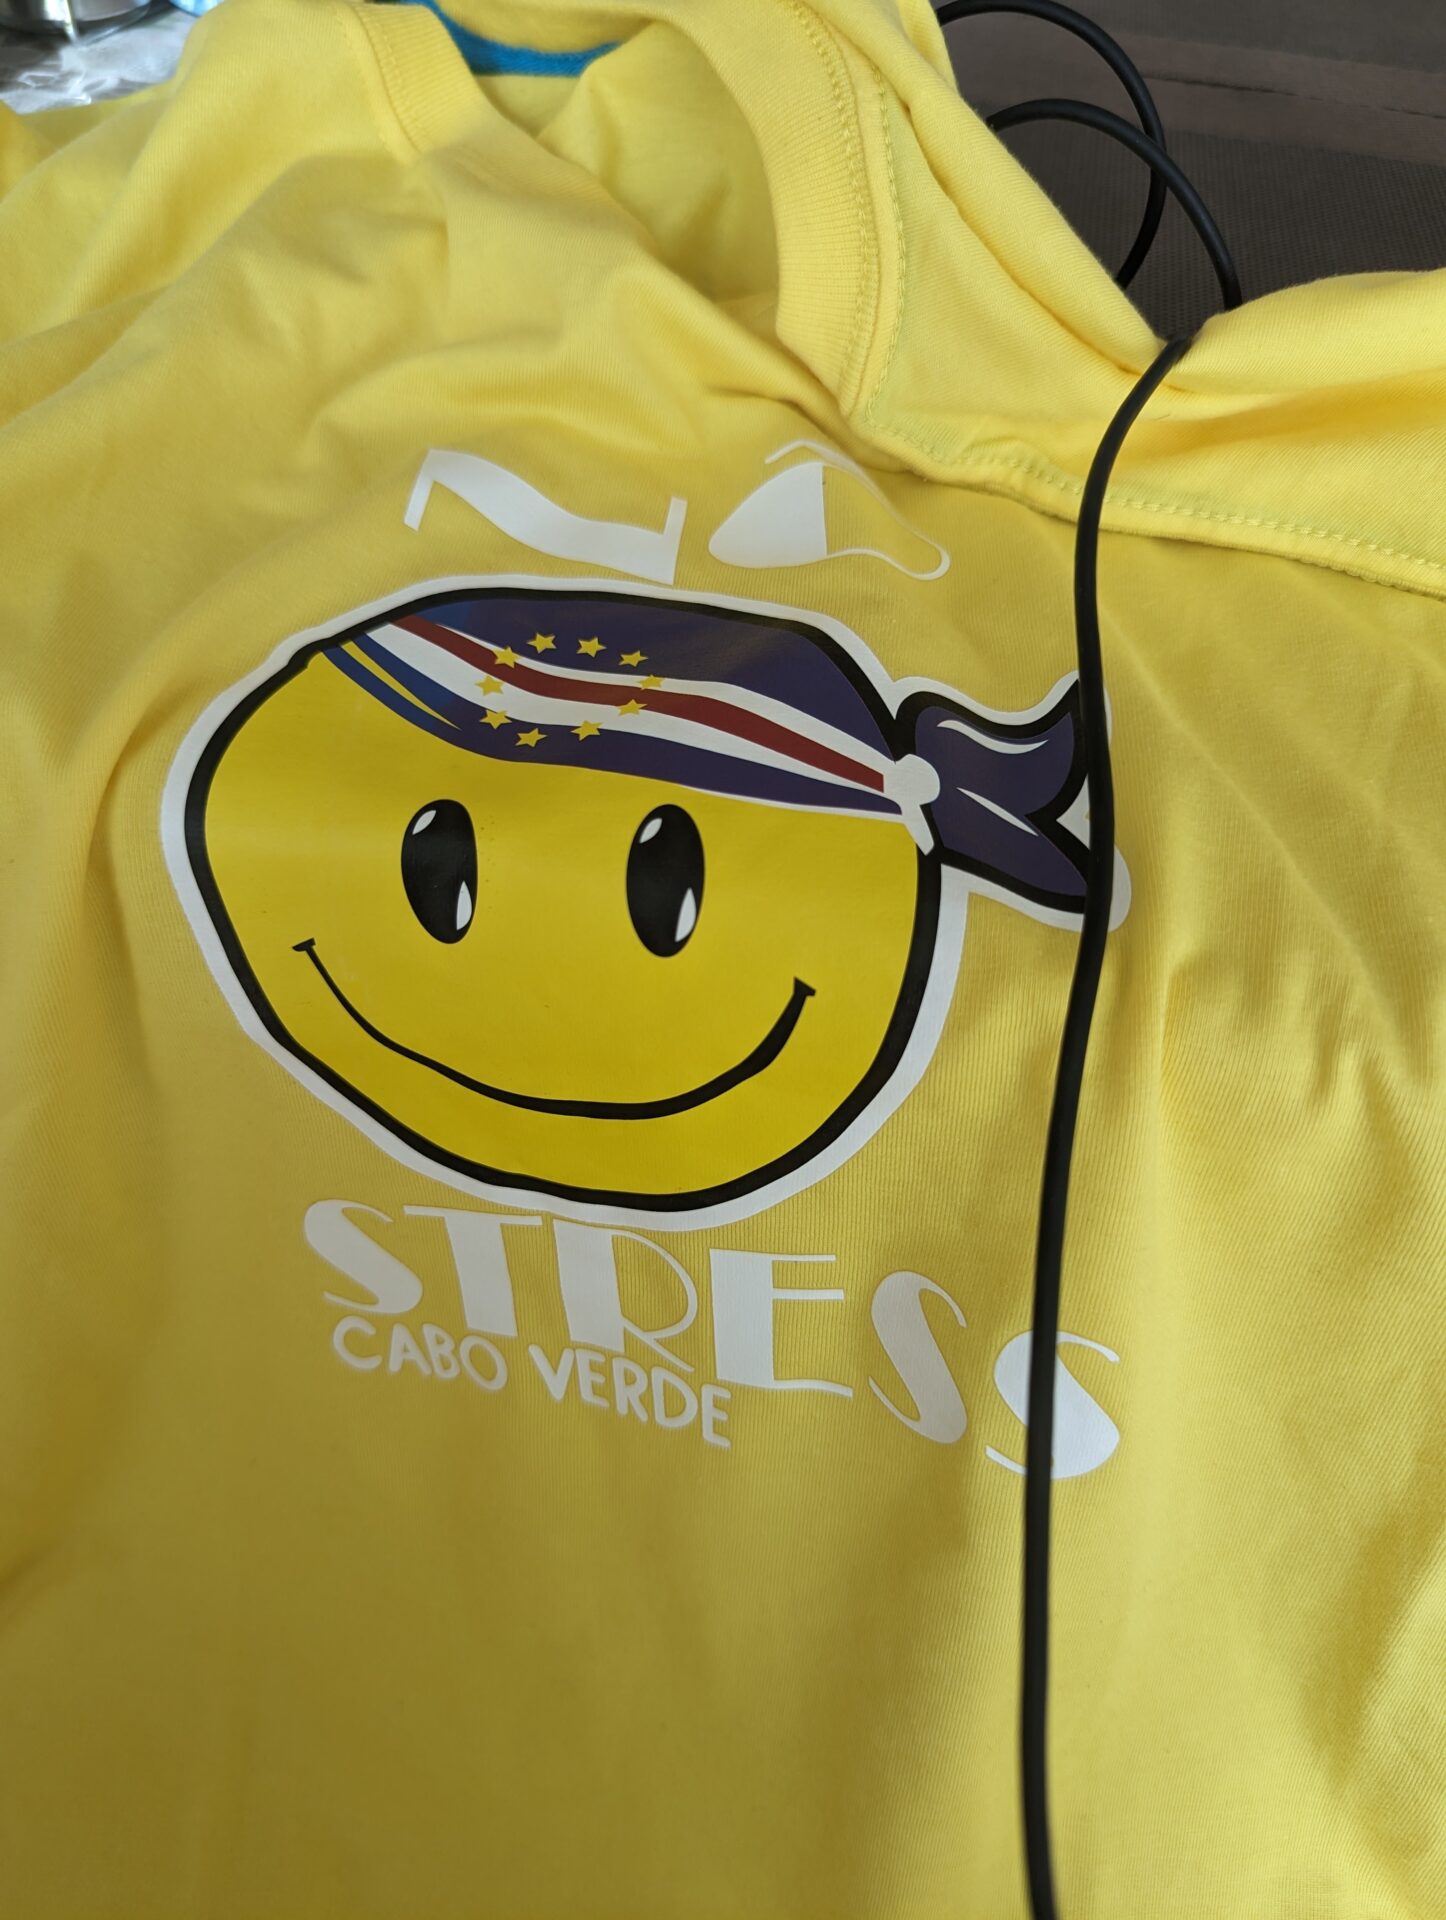 a yellow shirt with a smiley face on it